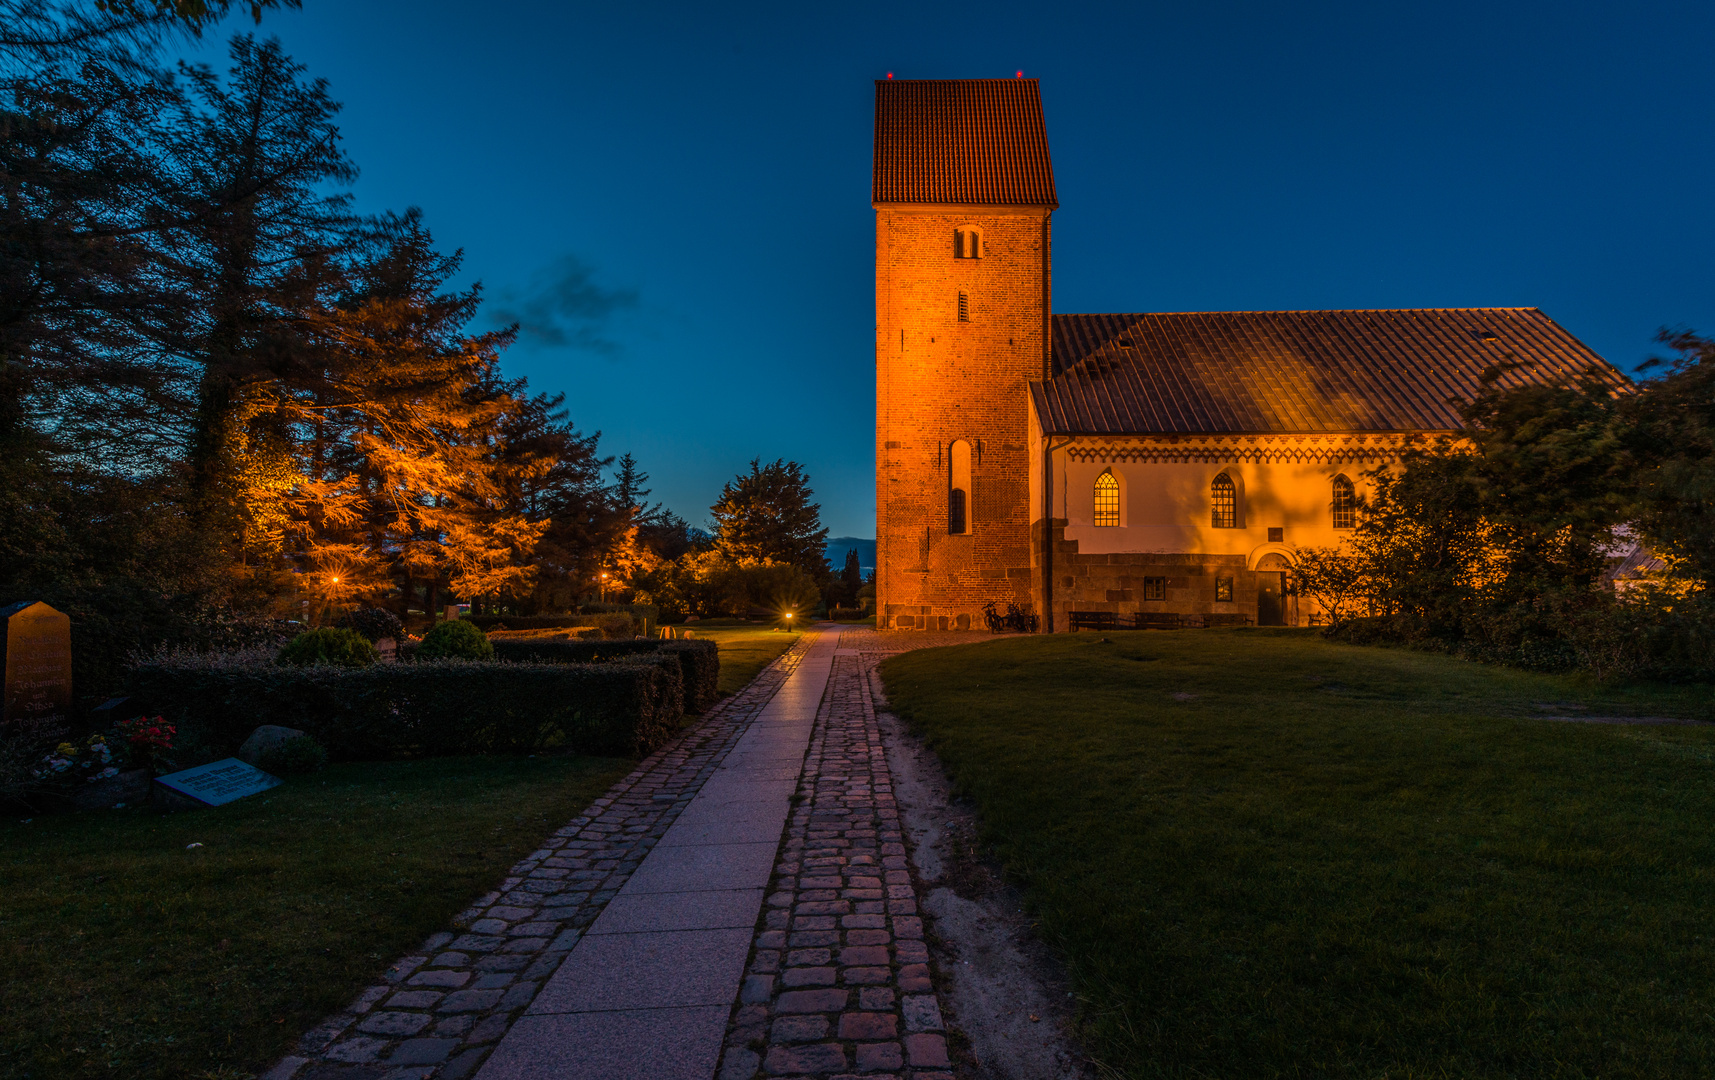 St. Severin in Keitum / Sylt